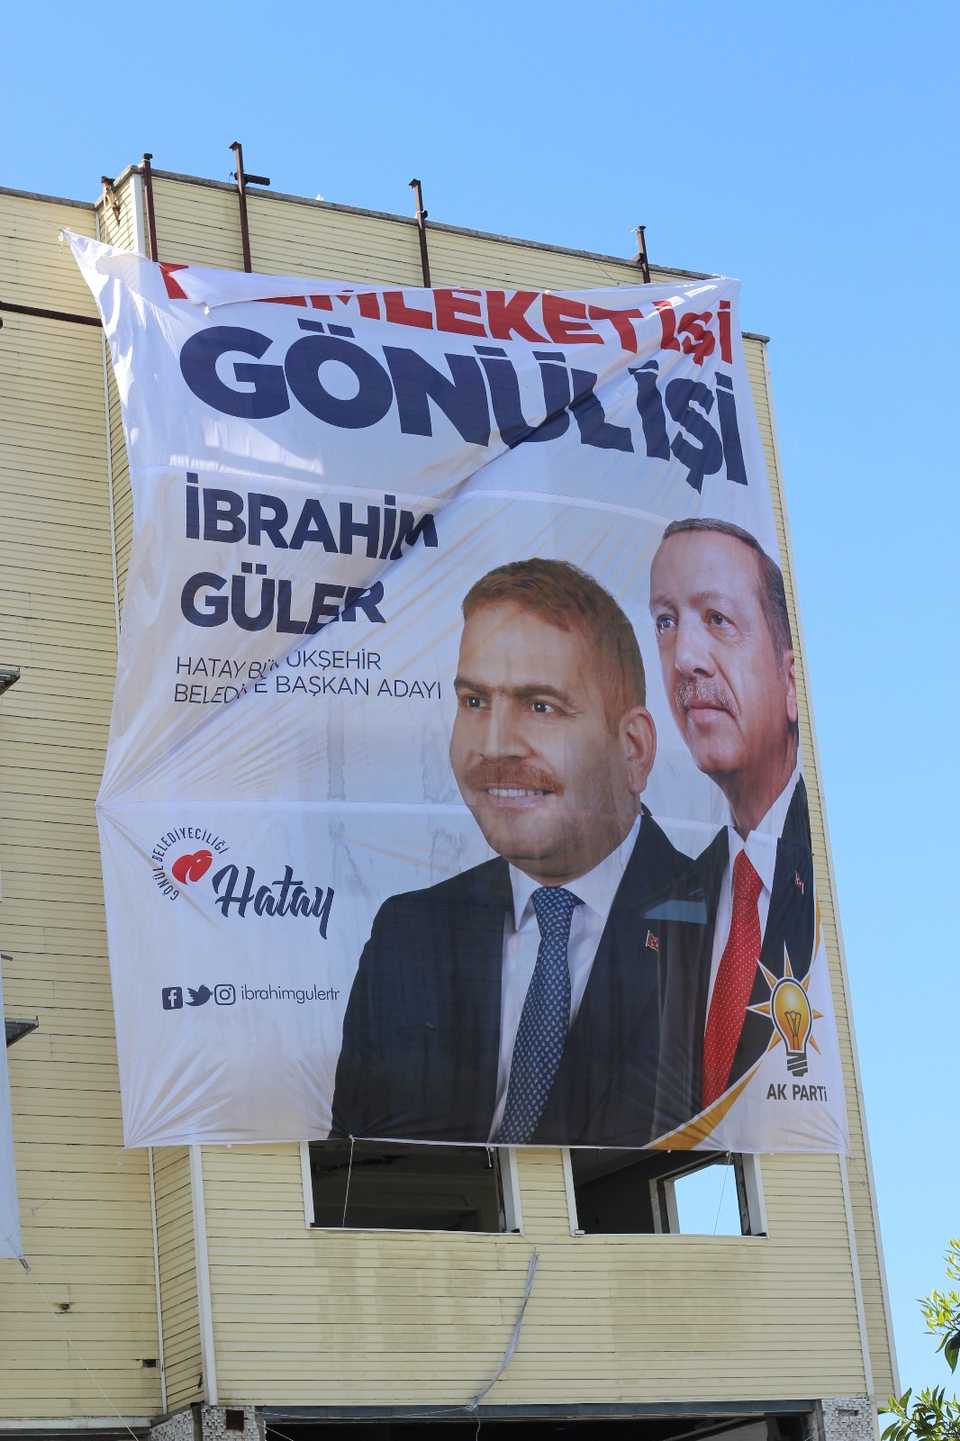 AK Party campaign in Hatay.